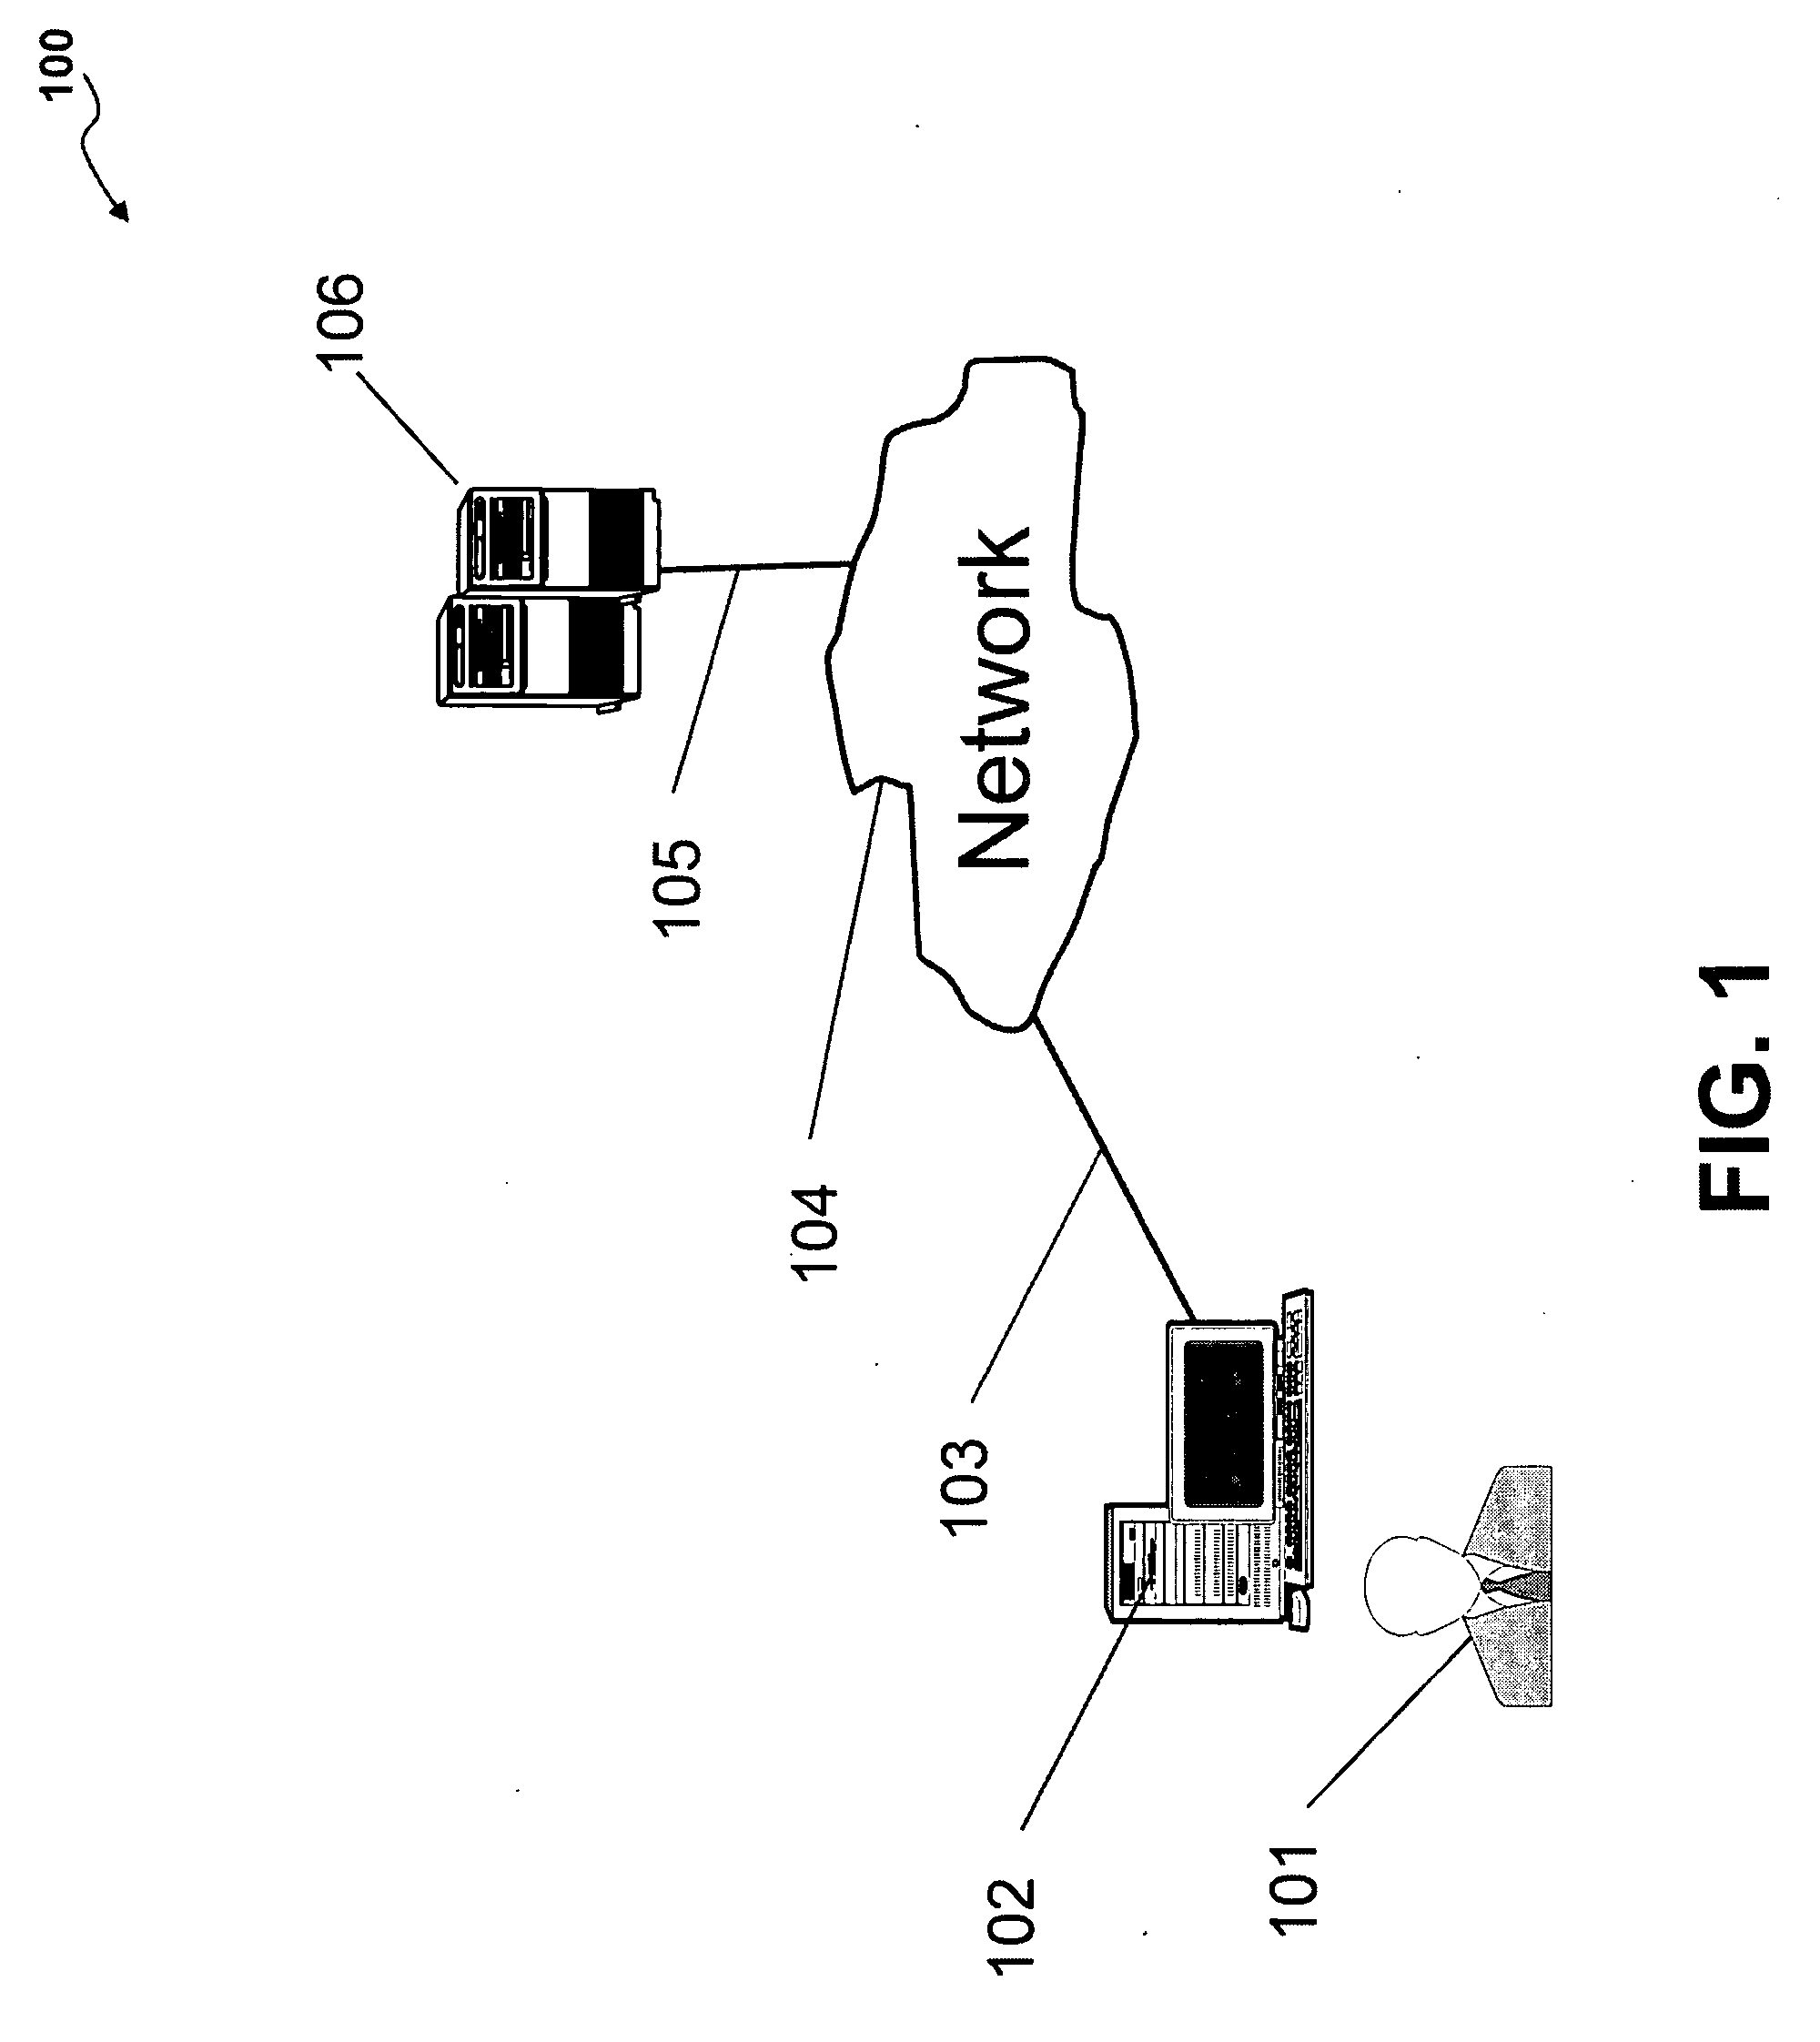 Computer system and method for facilitating a mortgage asset exchange